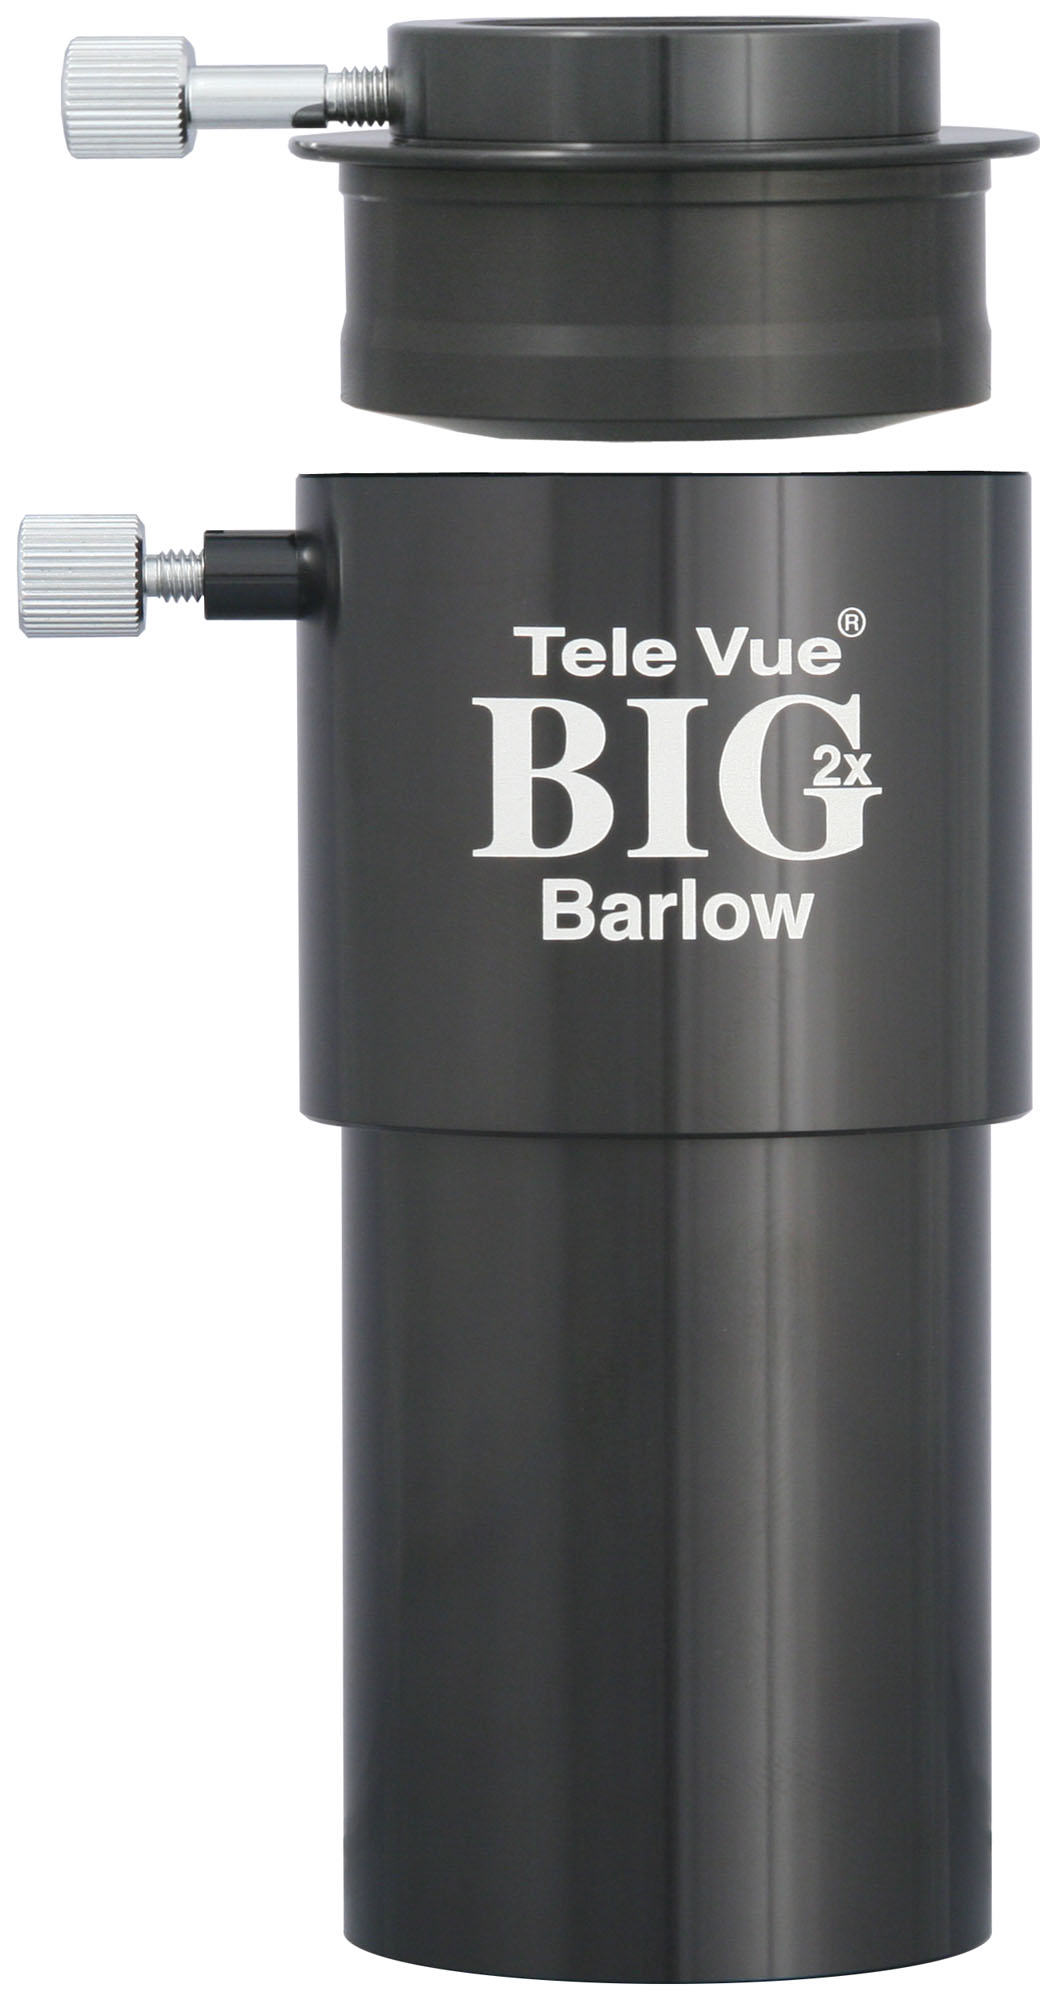 2X Big Barlow 2” with 1¼" adapter